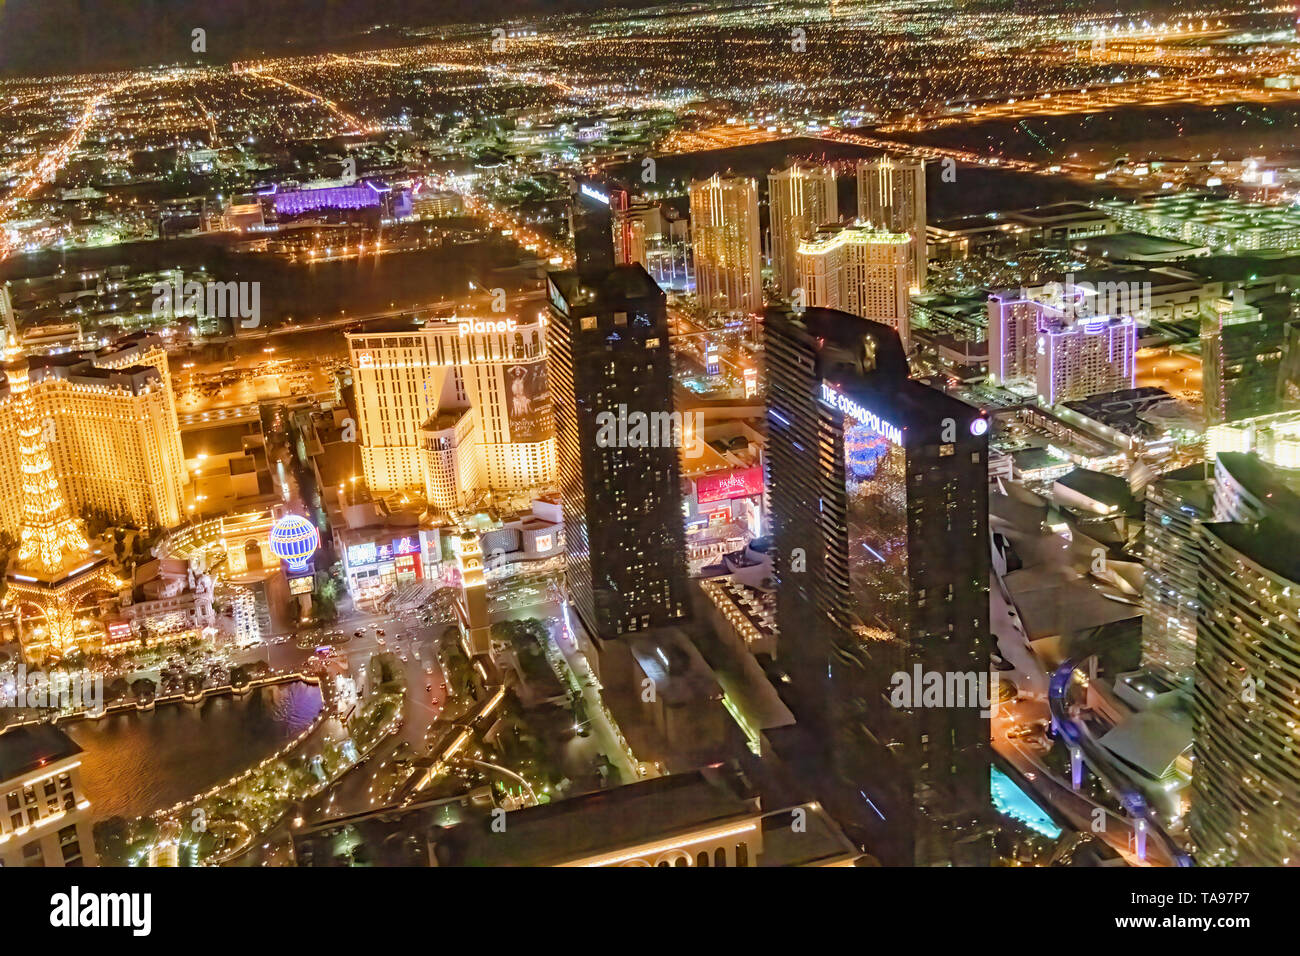 LAS VEGAS, NV - JUNE 29, 2018: Aerial night view of city streets. Las Vegas is known as the Sin City, City of Lights, Gambling Capital of the World. Stock Photo